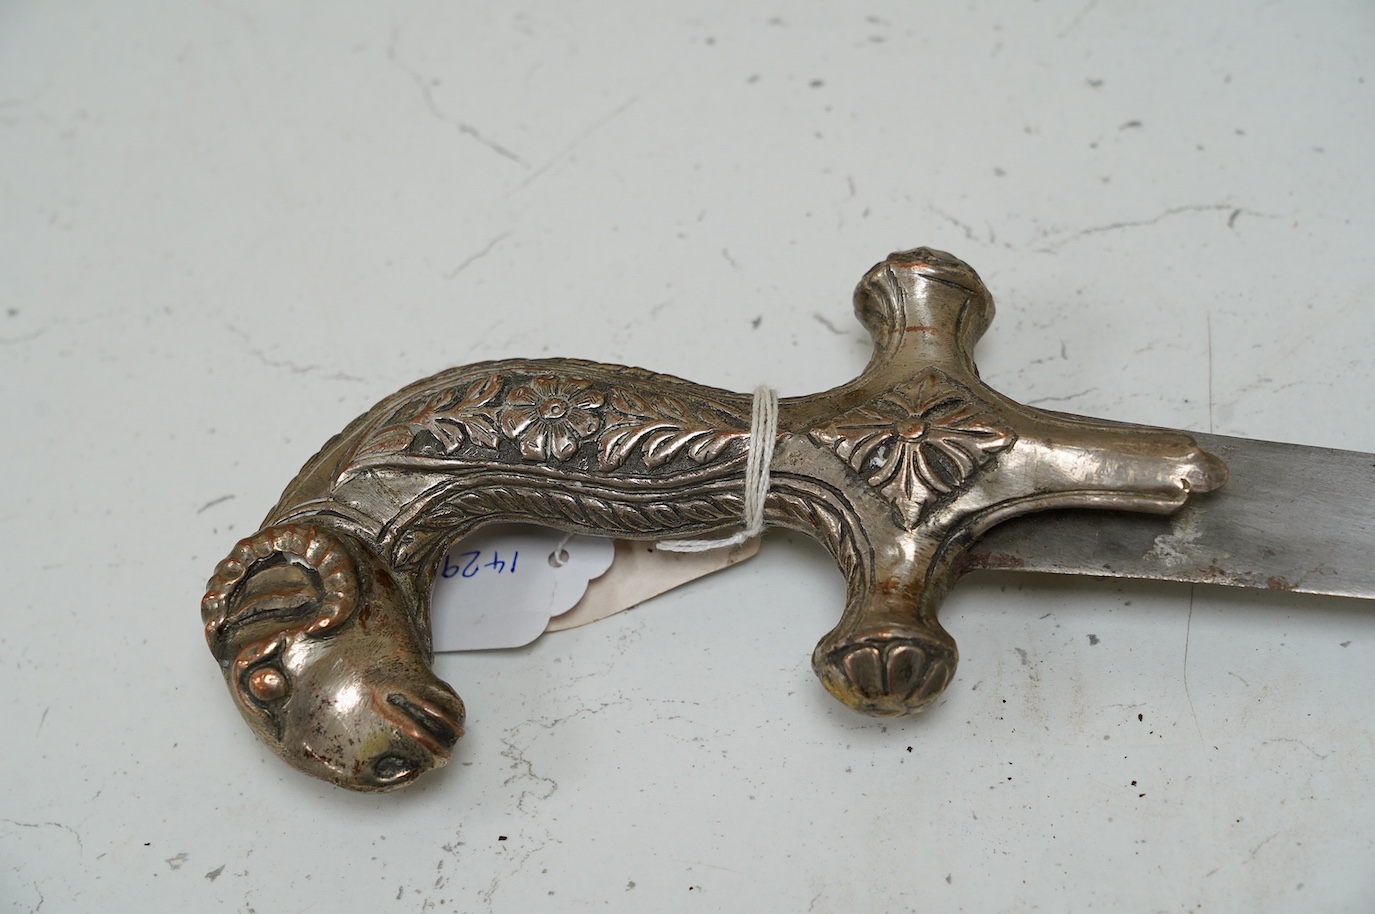 A decorative Indian sword, Shamshir hilt of embossed silver plated copper with a rams head pommel, blade 73.5cm. Condition - good